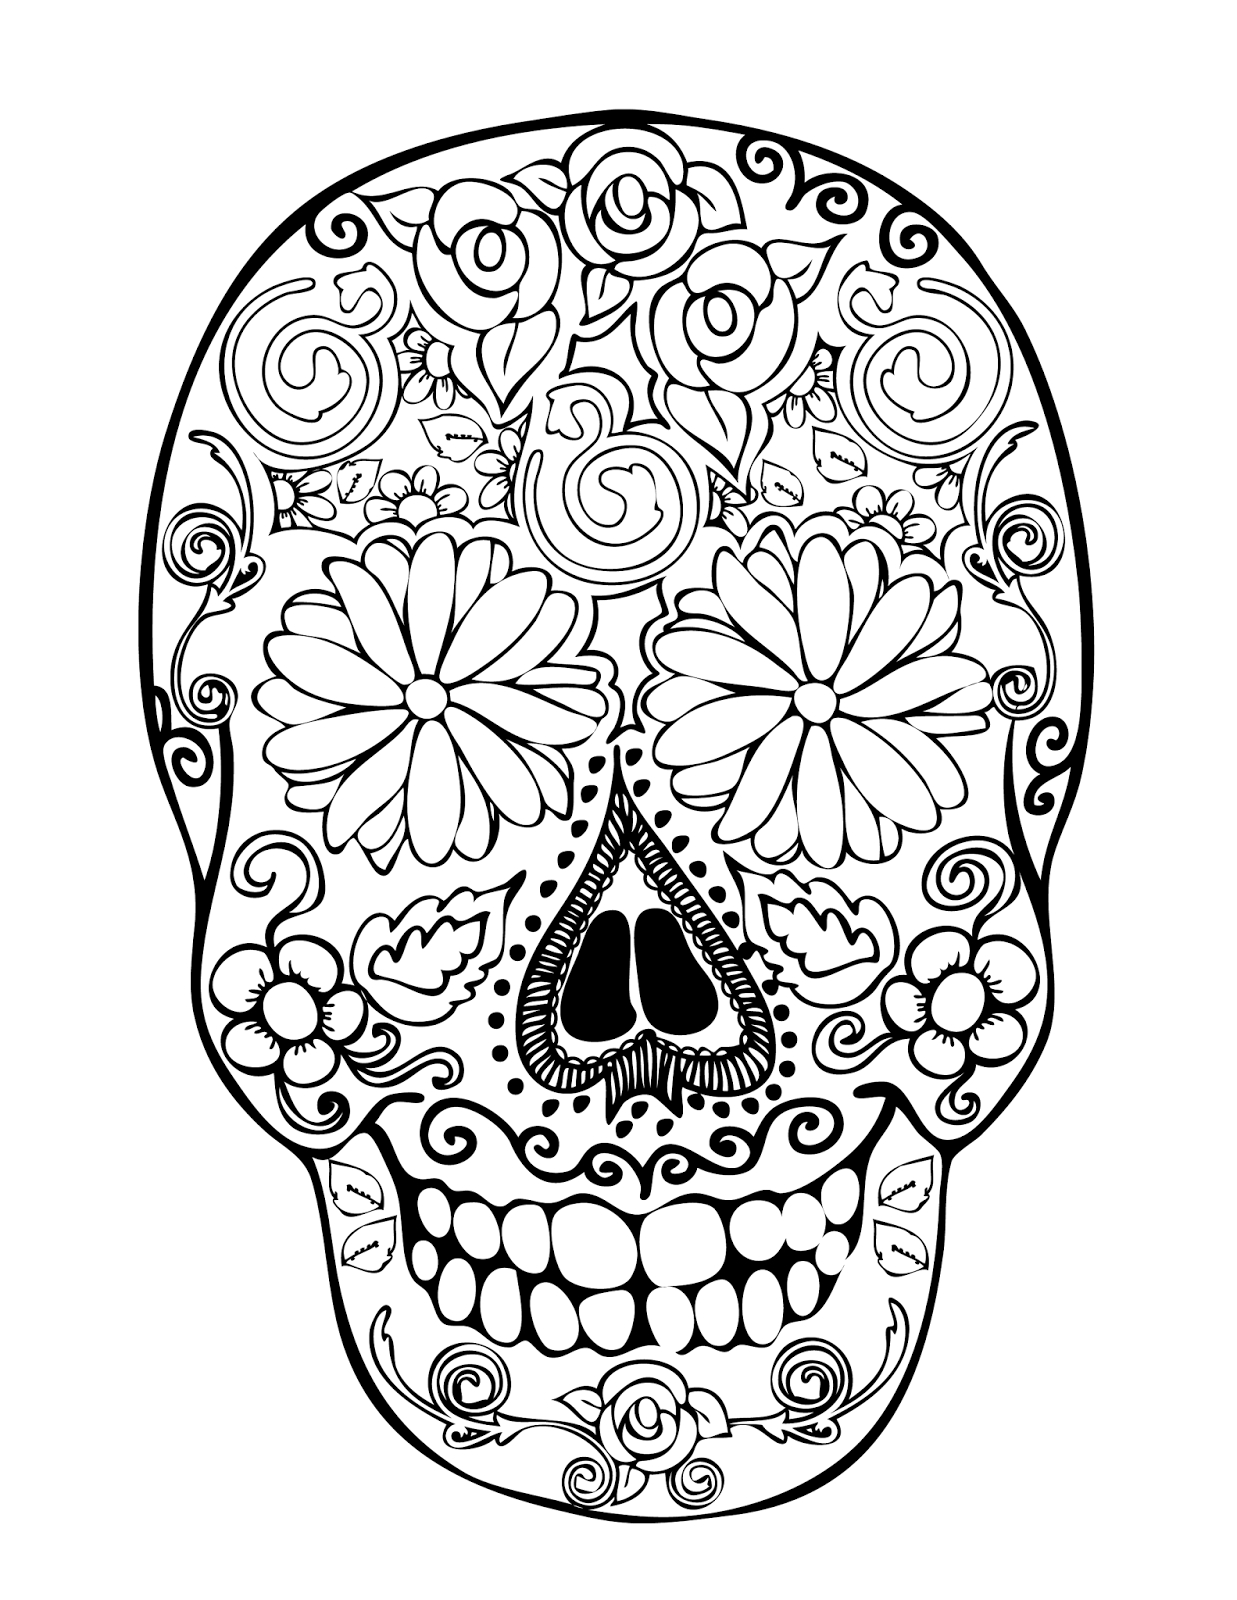 664 Simple Sugar Skull Cat Coloring Pages with disney character